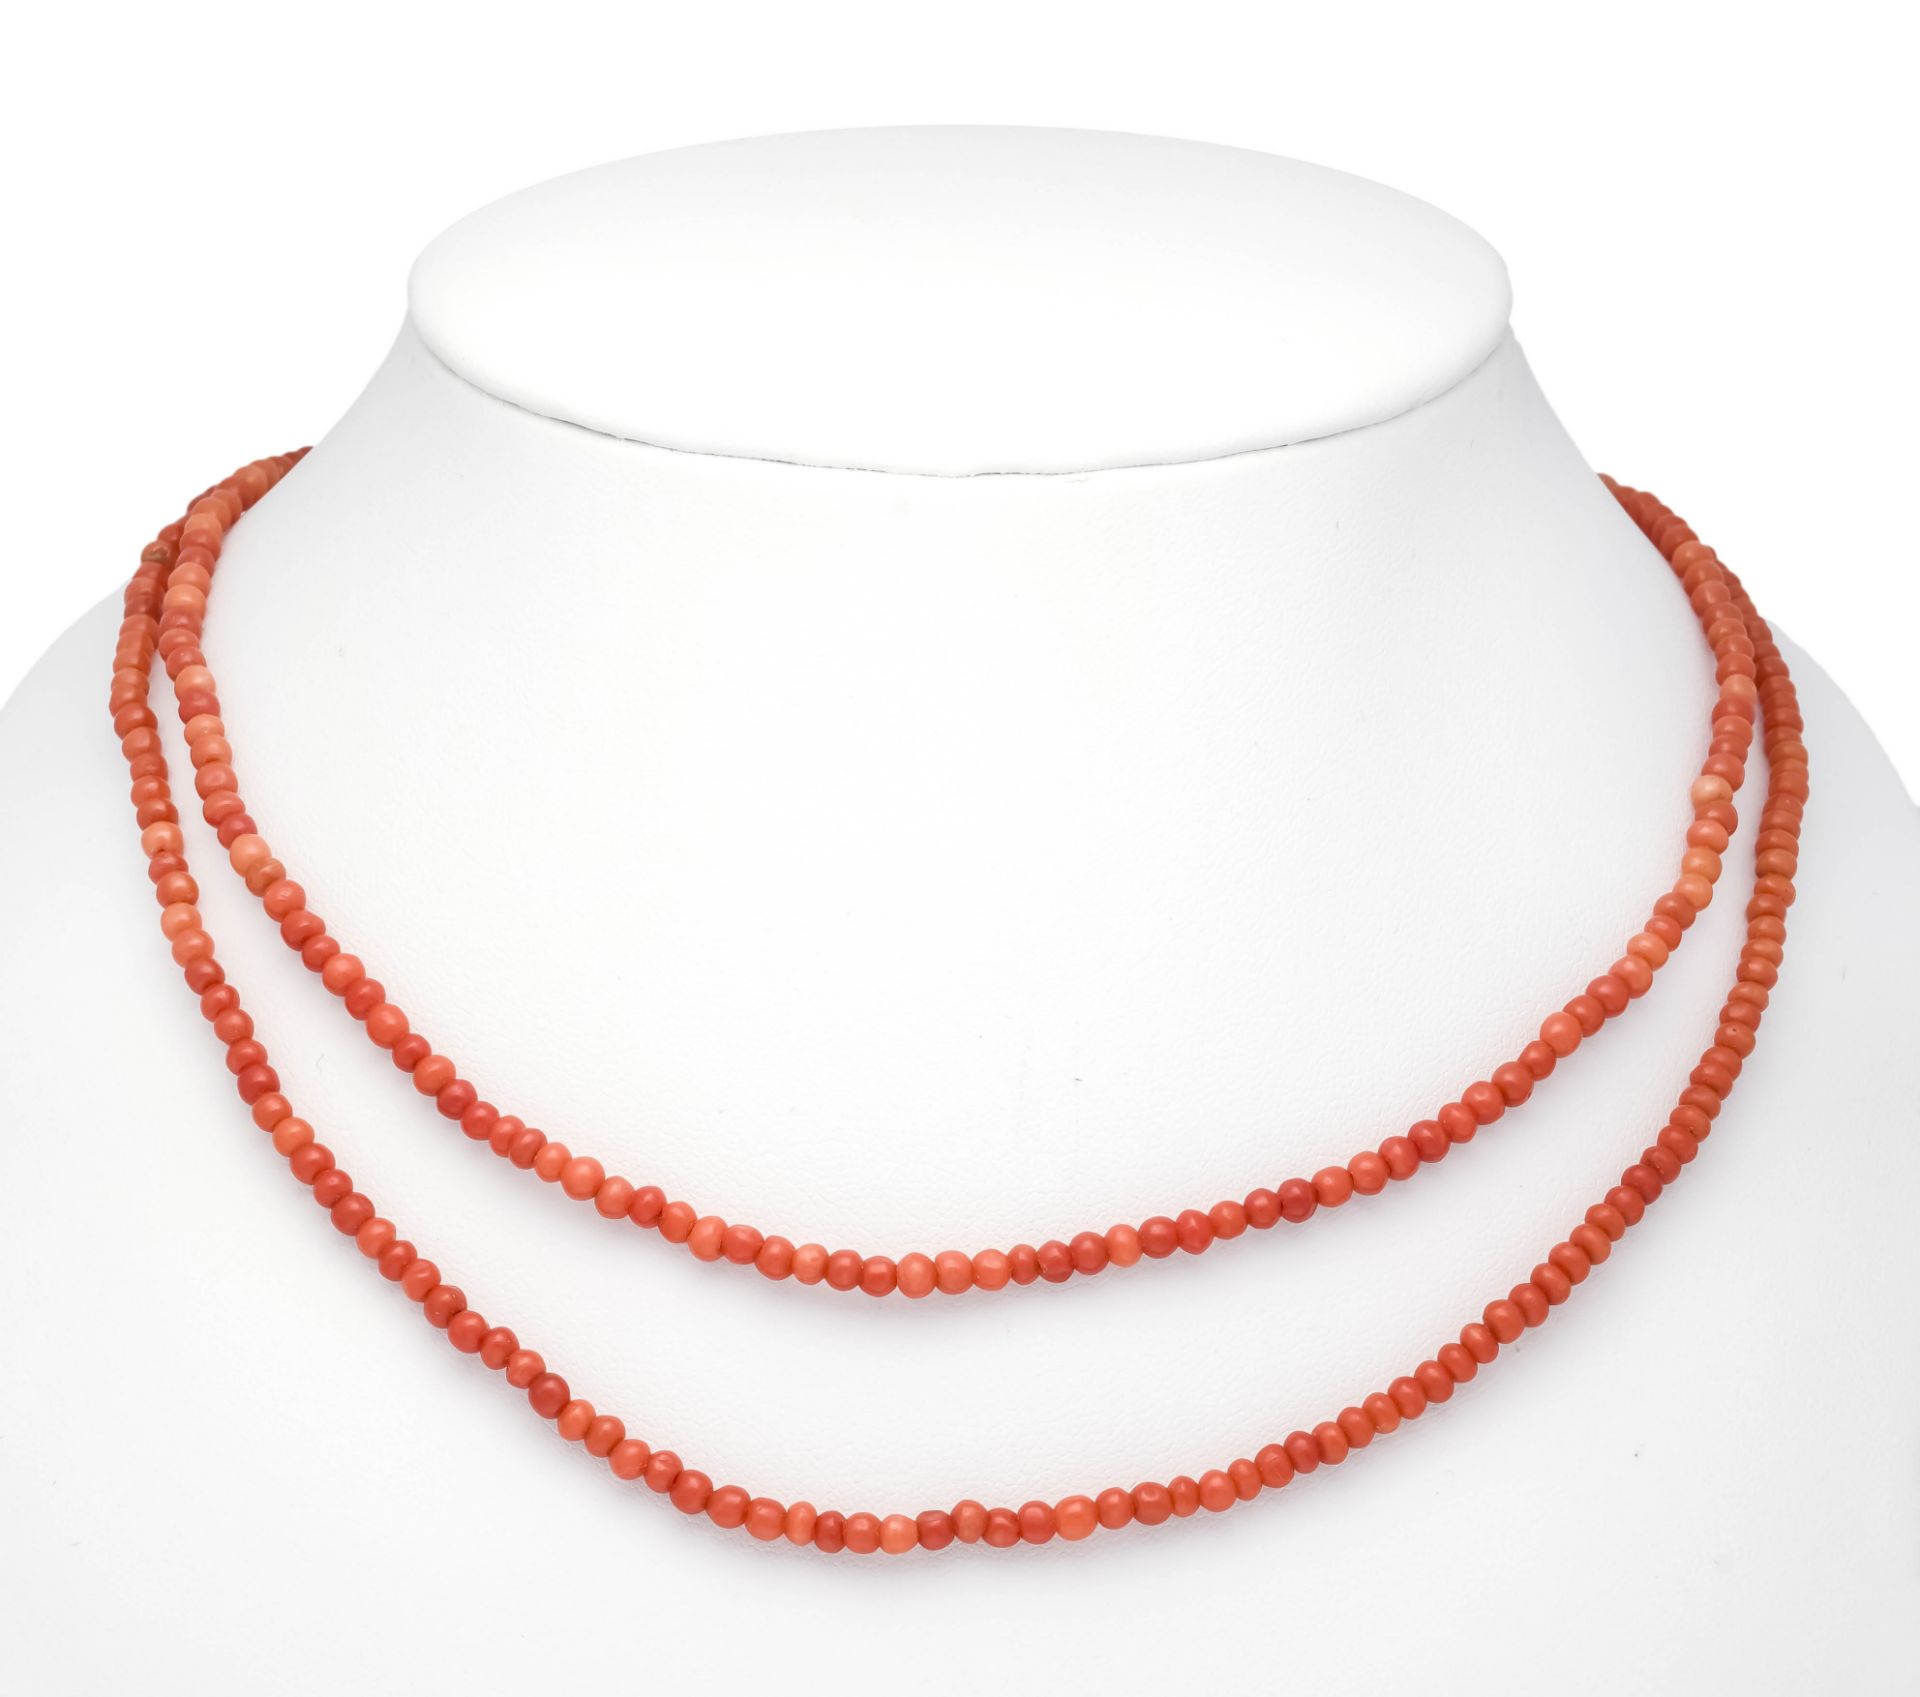 Endless coral necklace made of coral beads 3.5 mm in a lighter, slightly orange-tinged red, l. 130